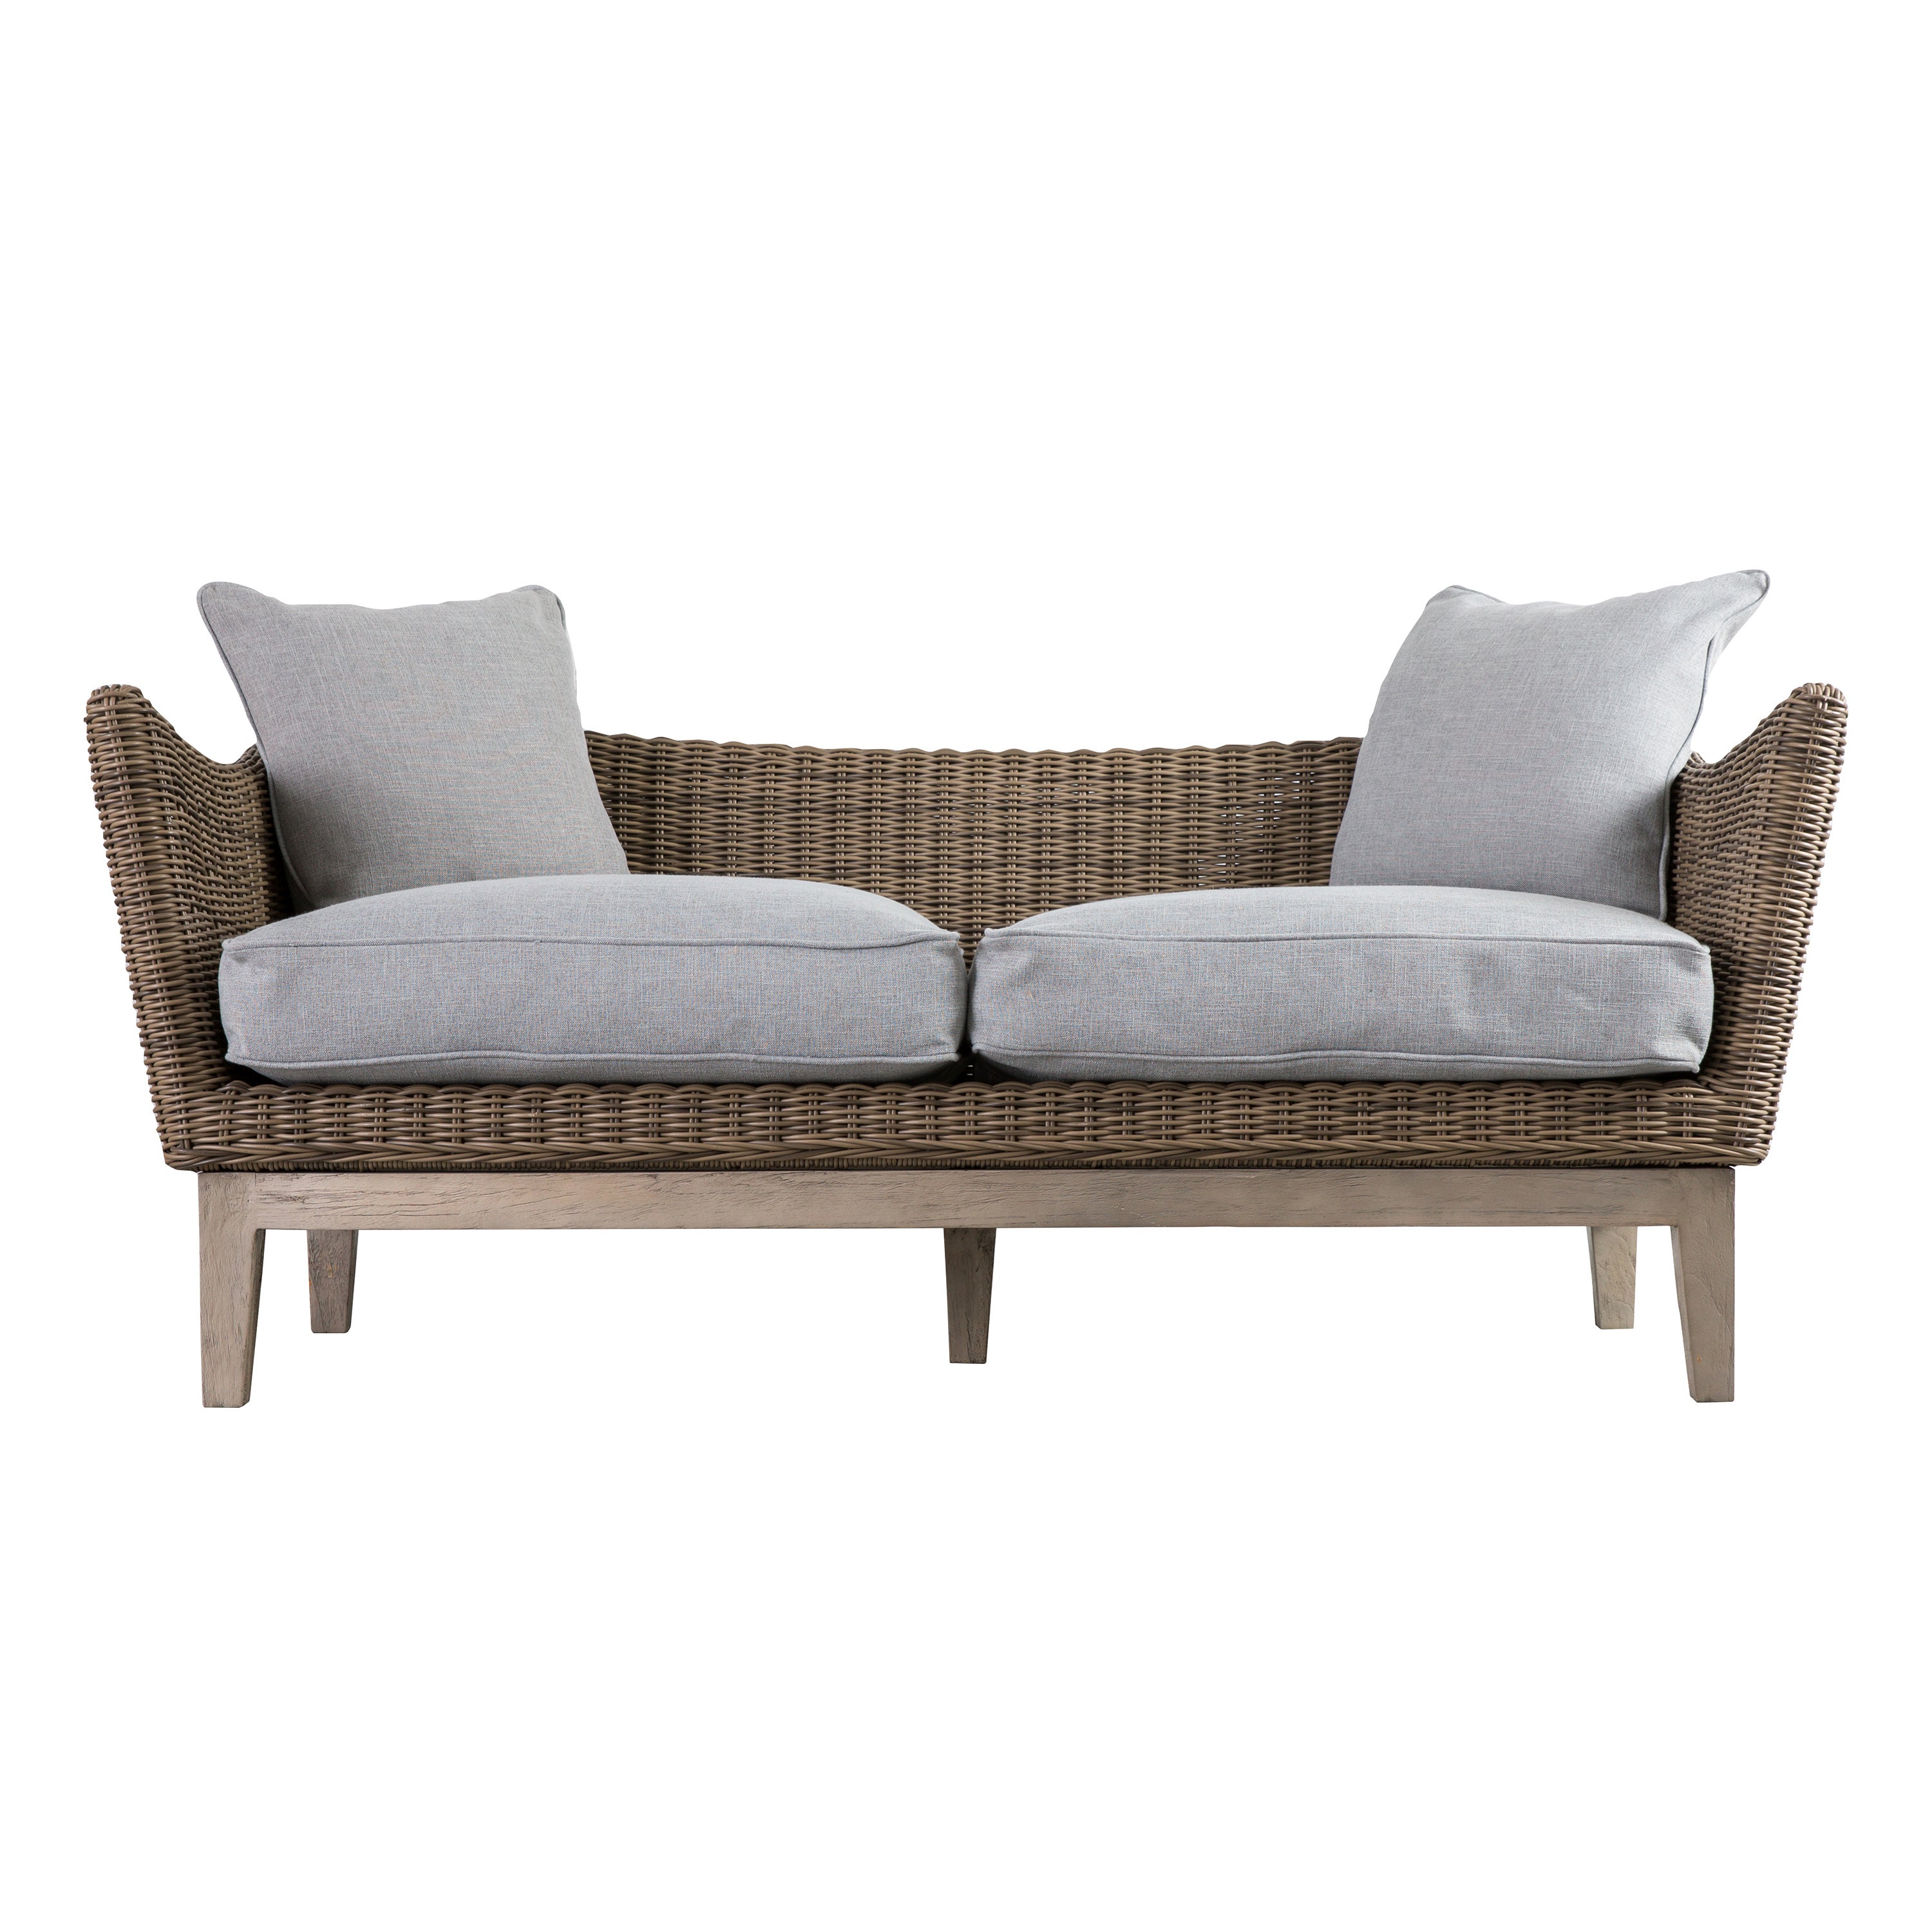 Gallery Direct Sydney Outdoor 2 Seater Sofa